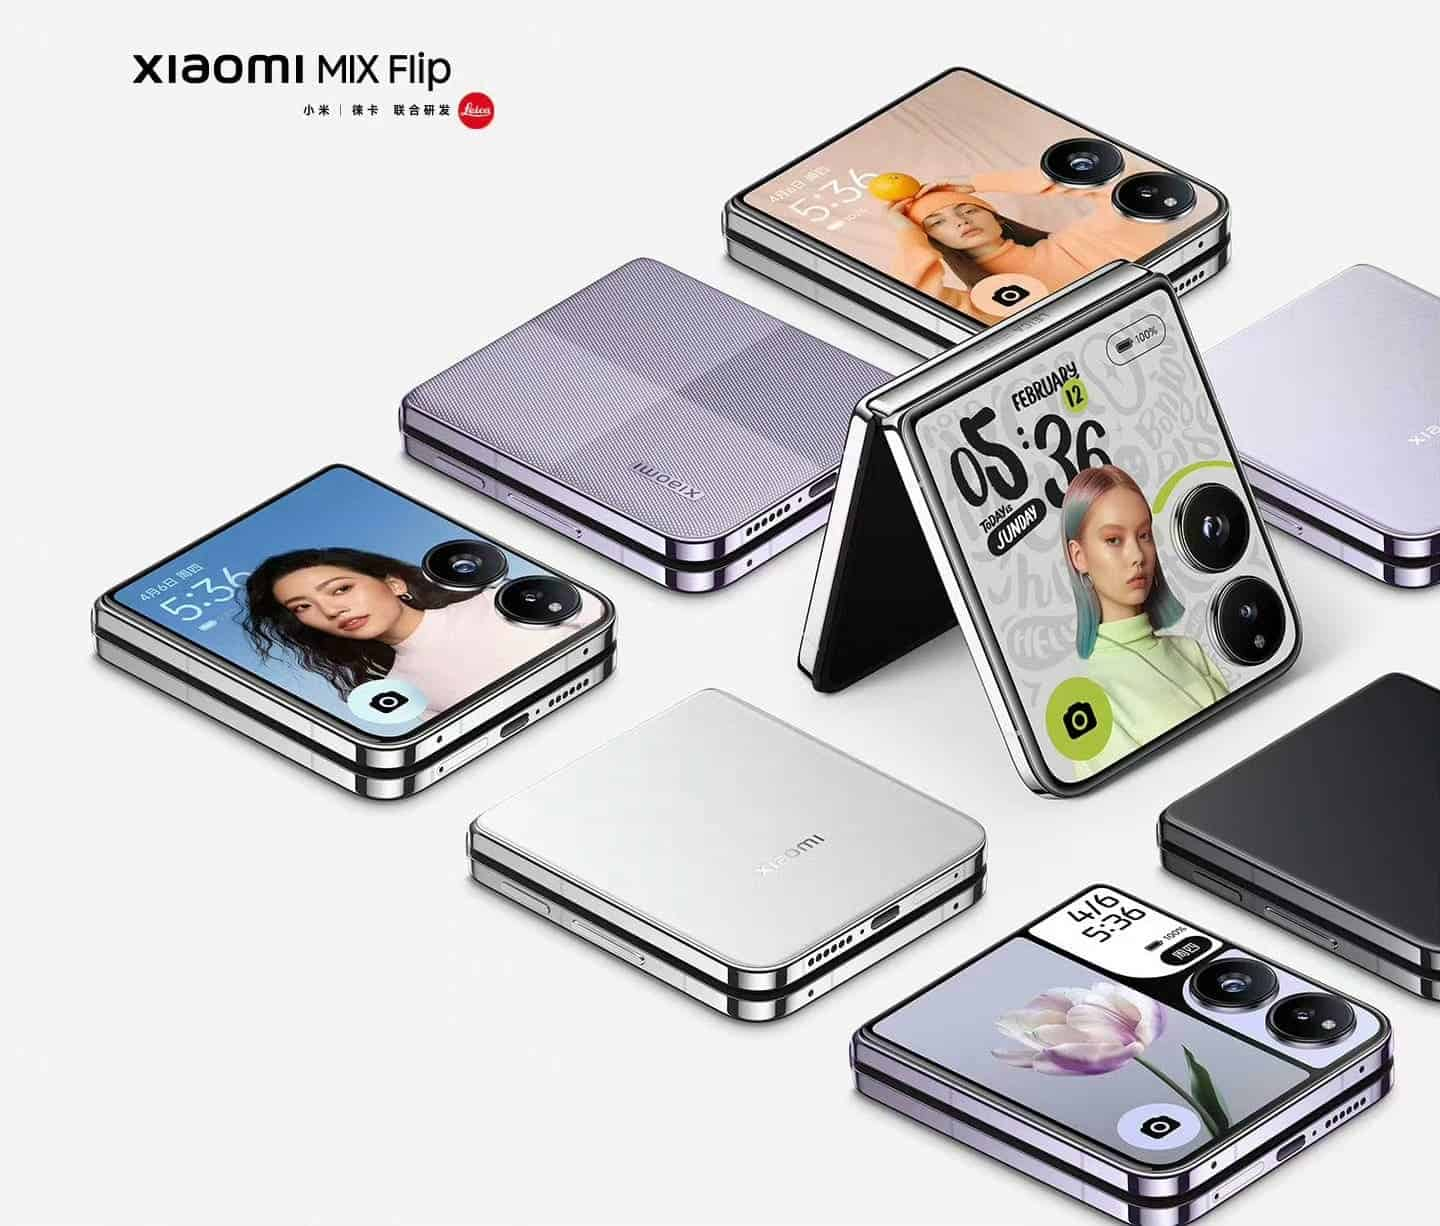 Xiaomi MIX Flip Foldable Phone Launches with a Blind Sale at 7999 Yuan: Price Adjustments and Limited Stock